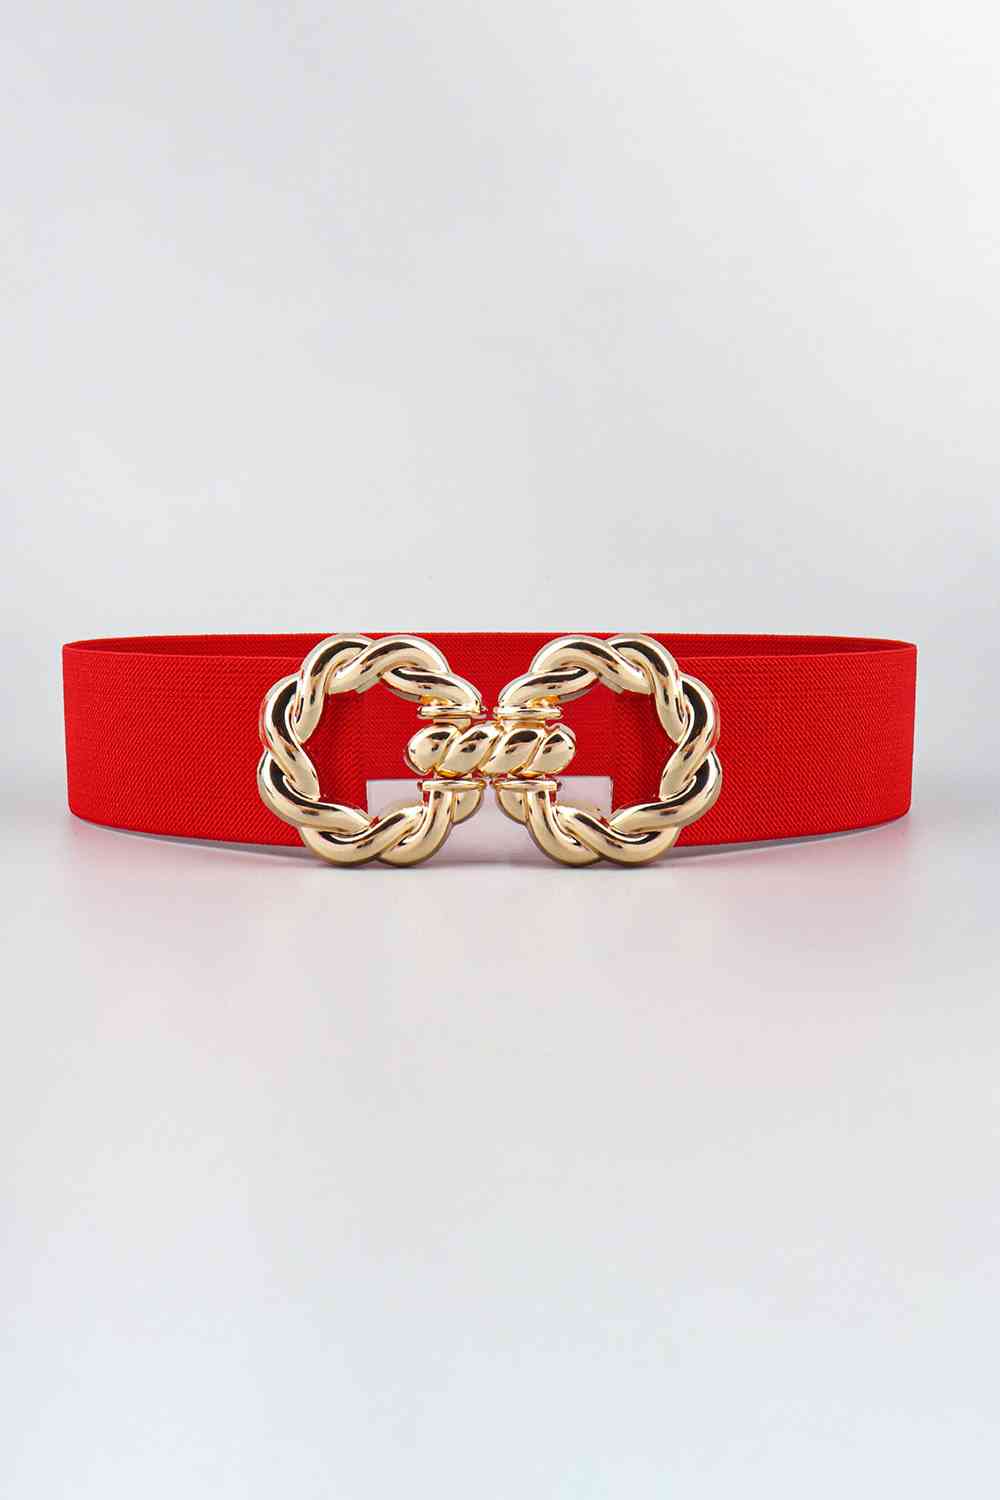 Zinc Alloy Buckle Elastic Belt Red One Size